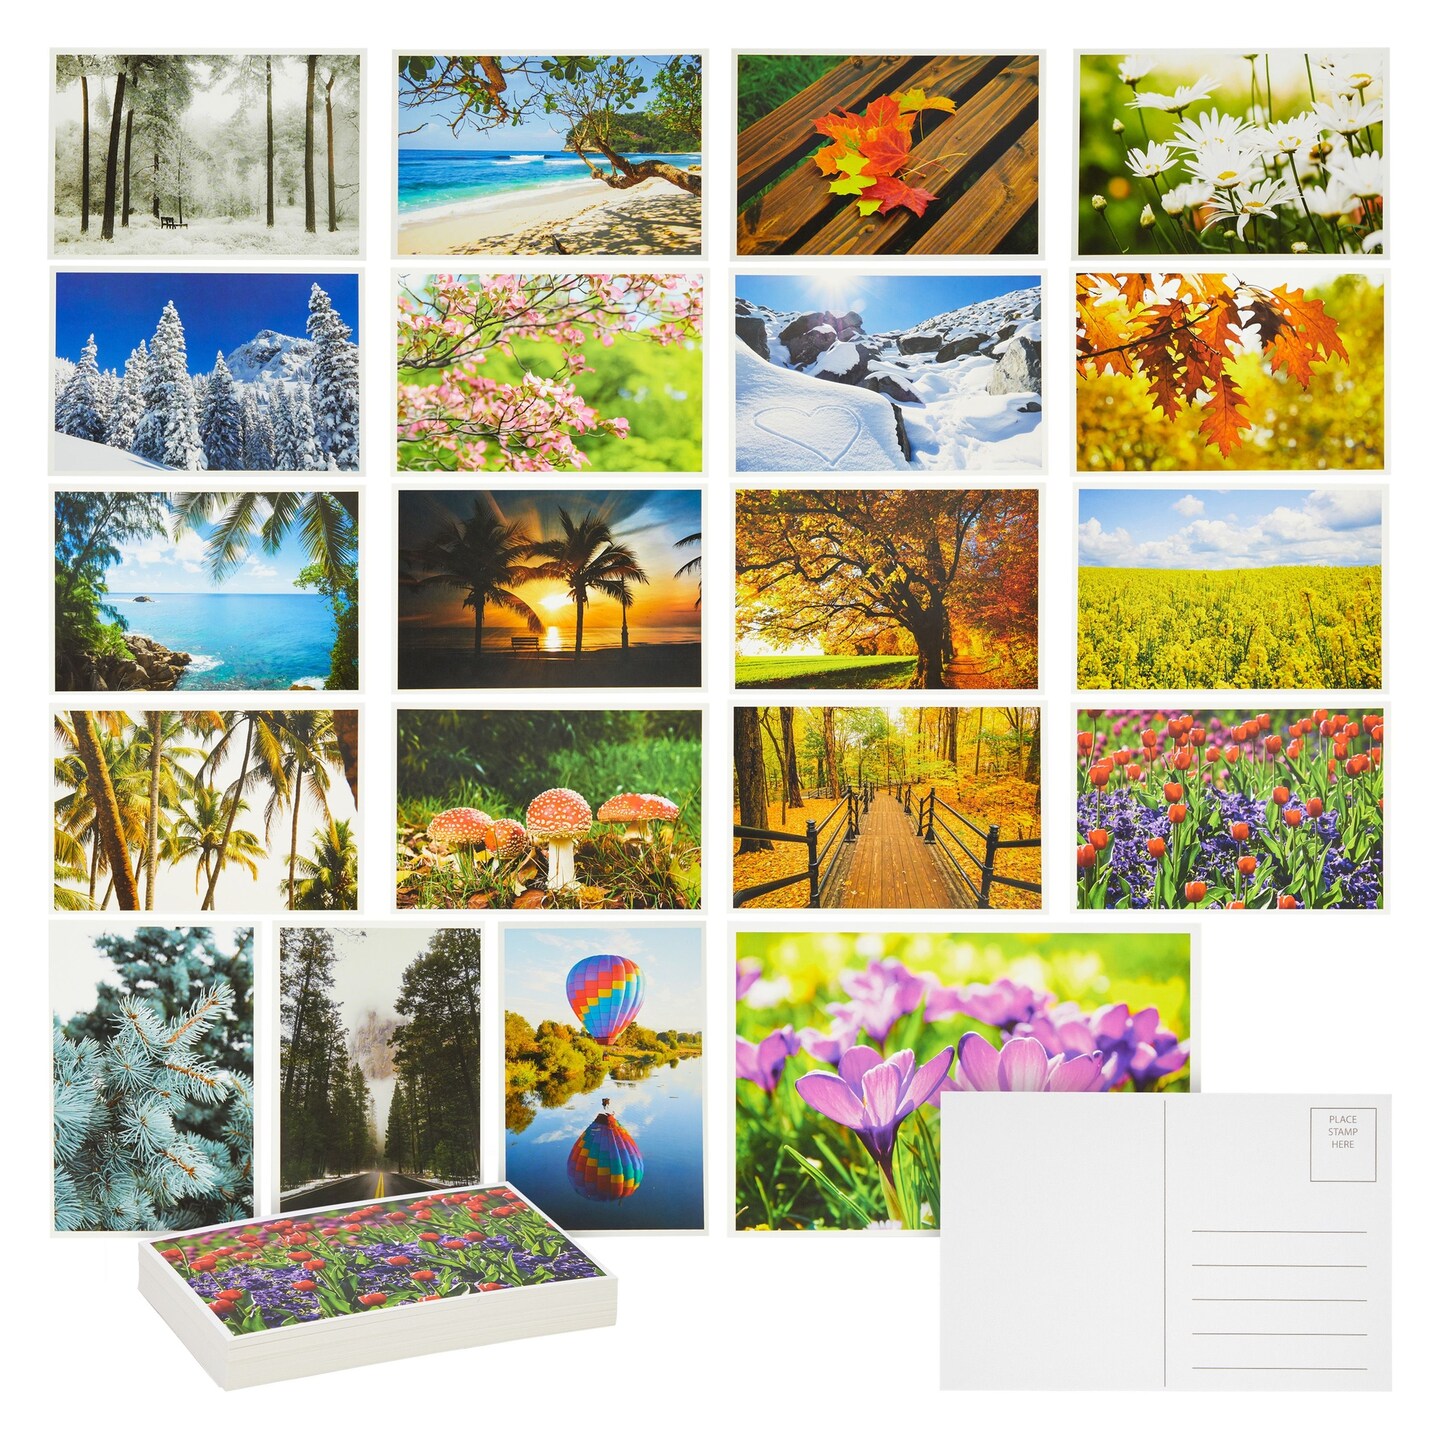 40 Pack Blank Travel Postcards for Mailing, 20 Assorted Nature Photos, Four Seasons (4 x 6 In)